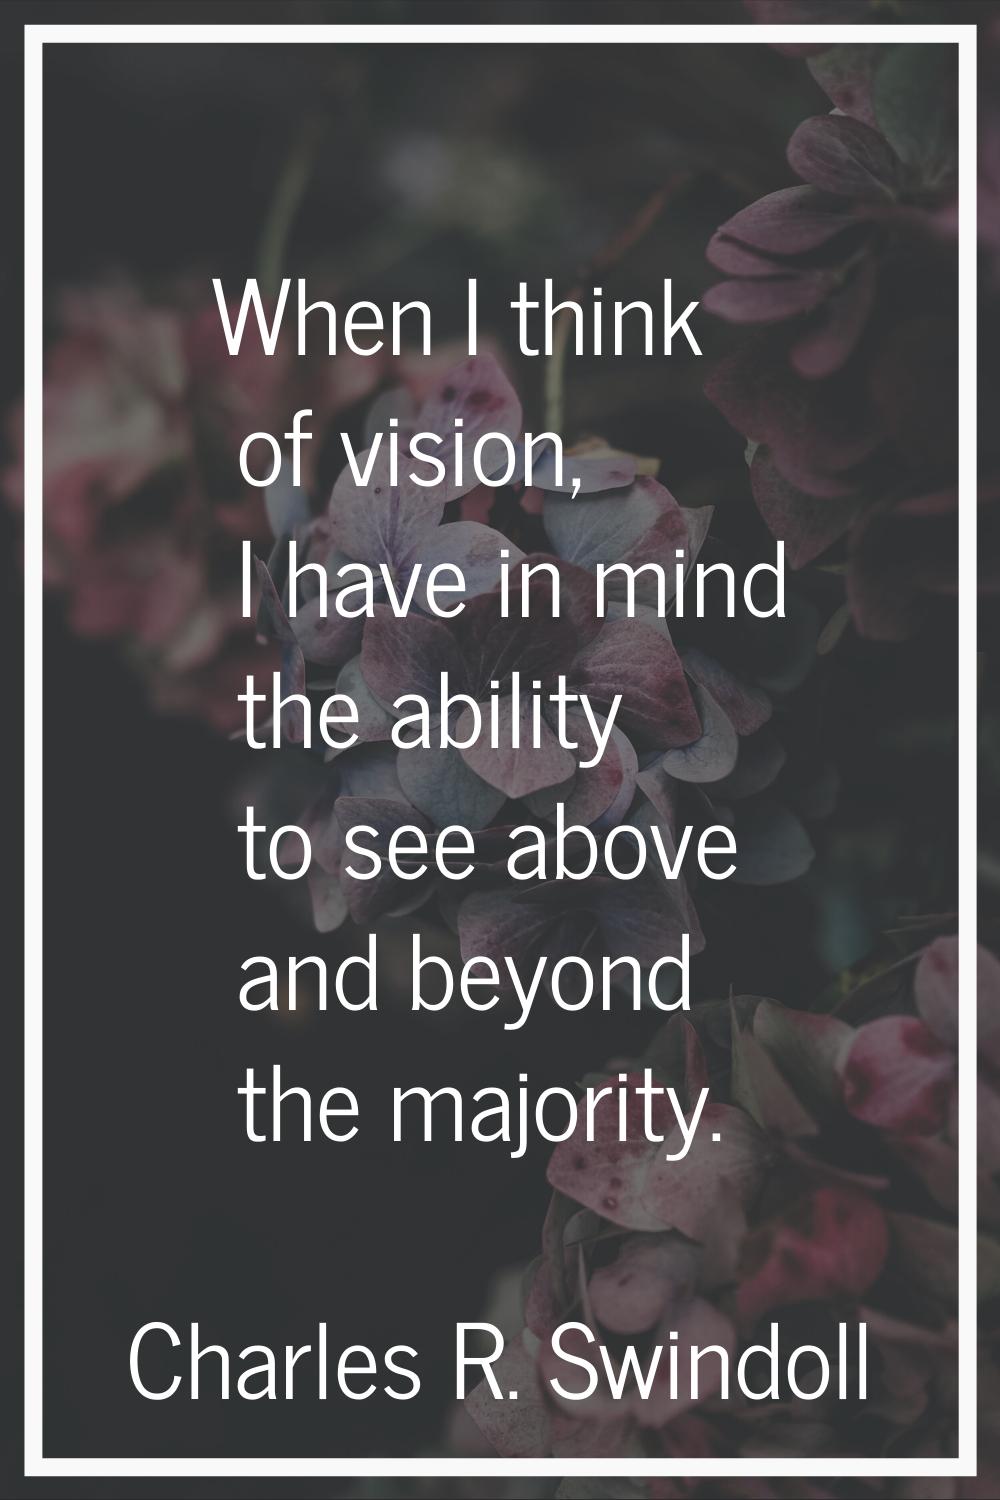 When I think of vision, I have in mind the ability to see above and beyond the majority.